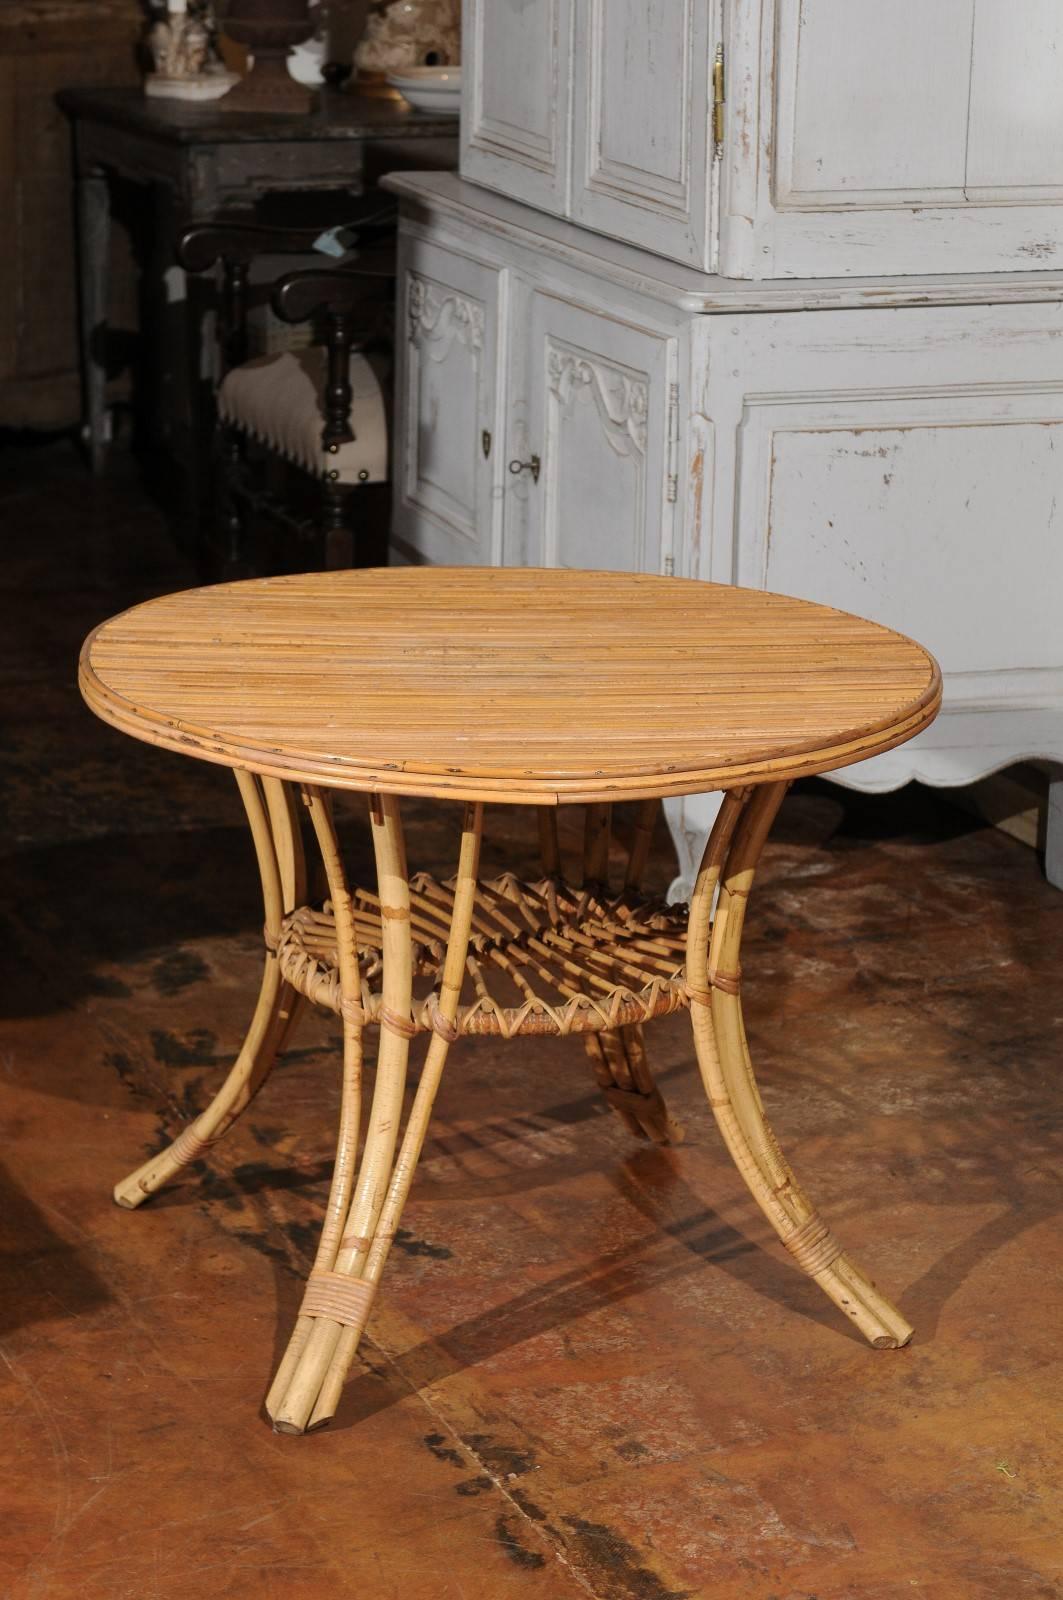 A French mid-century round rattan coffee table with lower shelf and splayed legs. This French rattan side table features a circular top raised over four splayed legs, connected to one another with a smaller pierced shelf. The choice of the simple